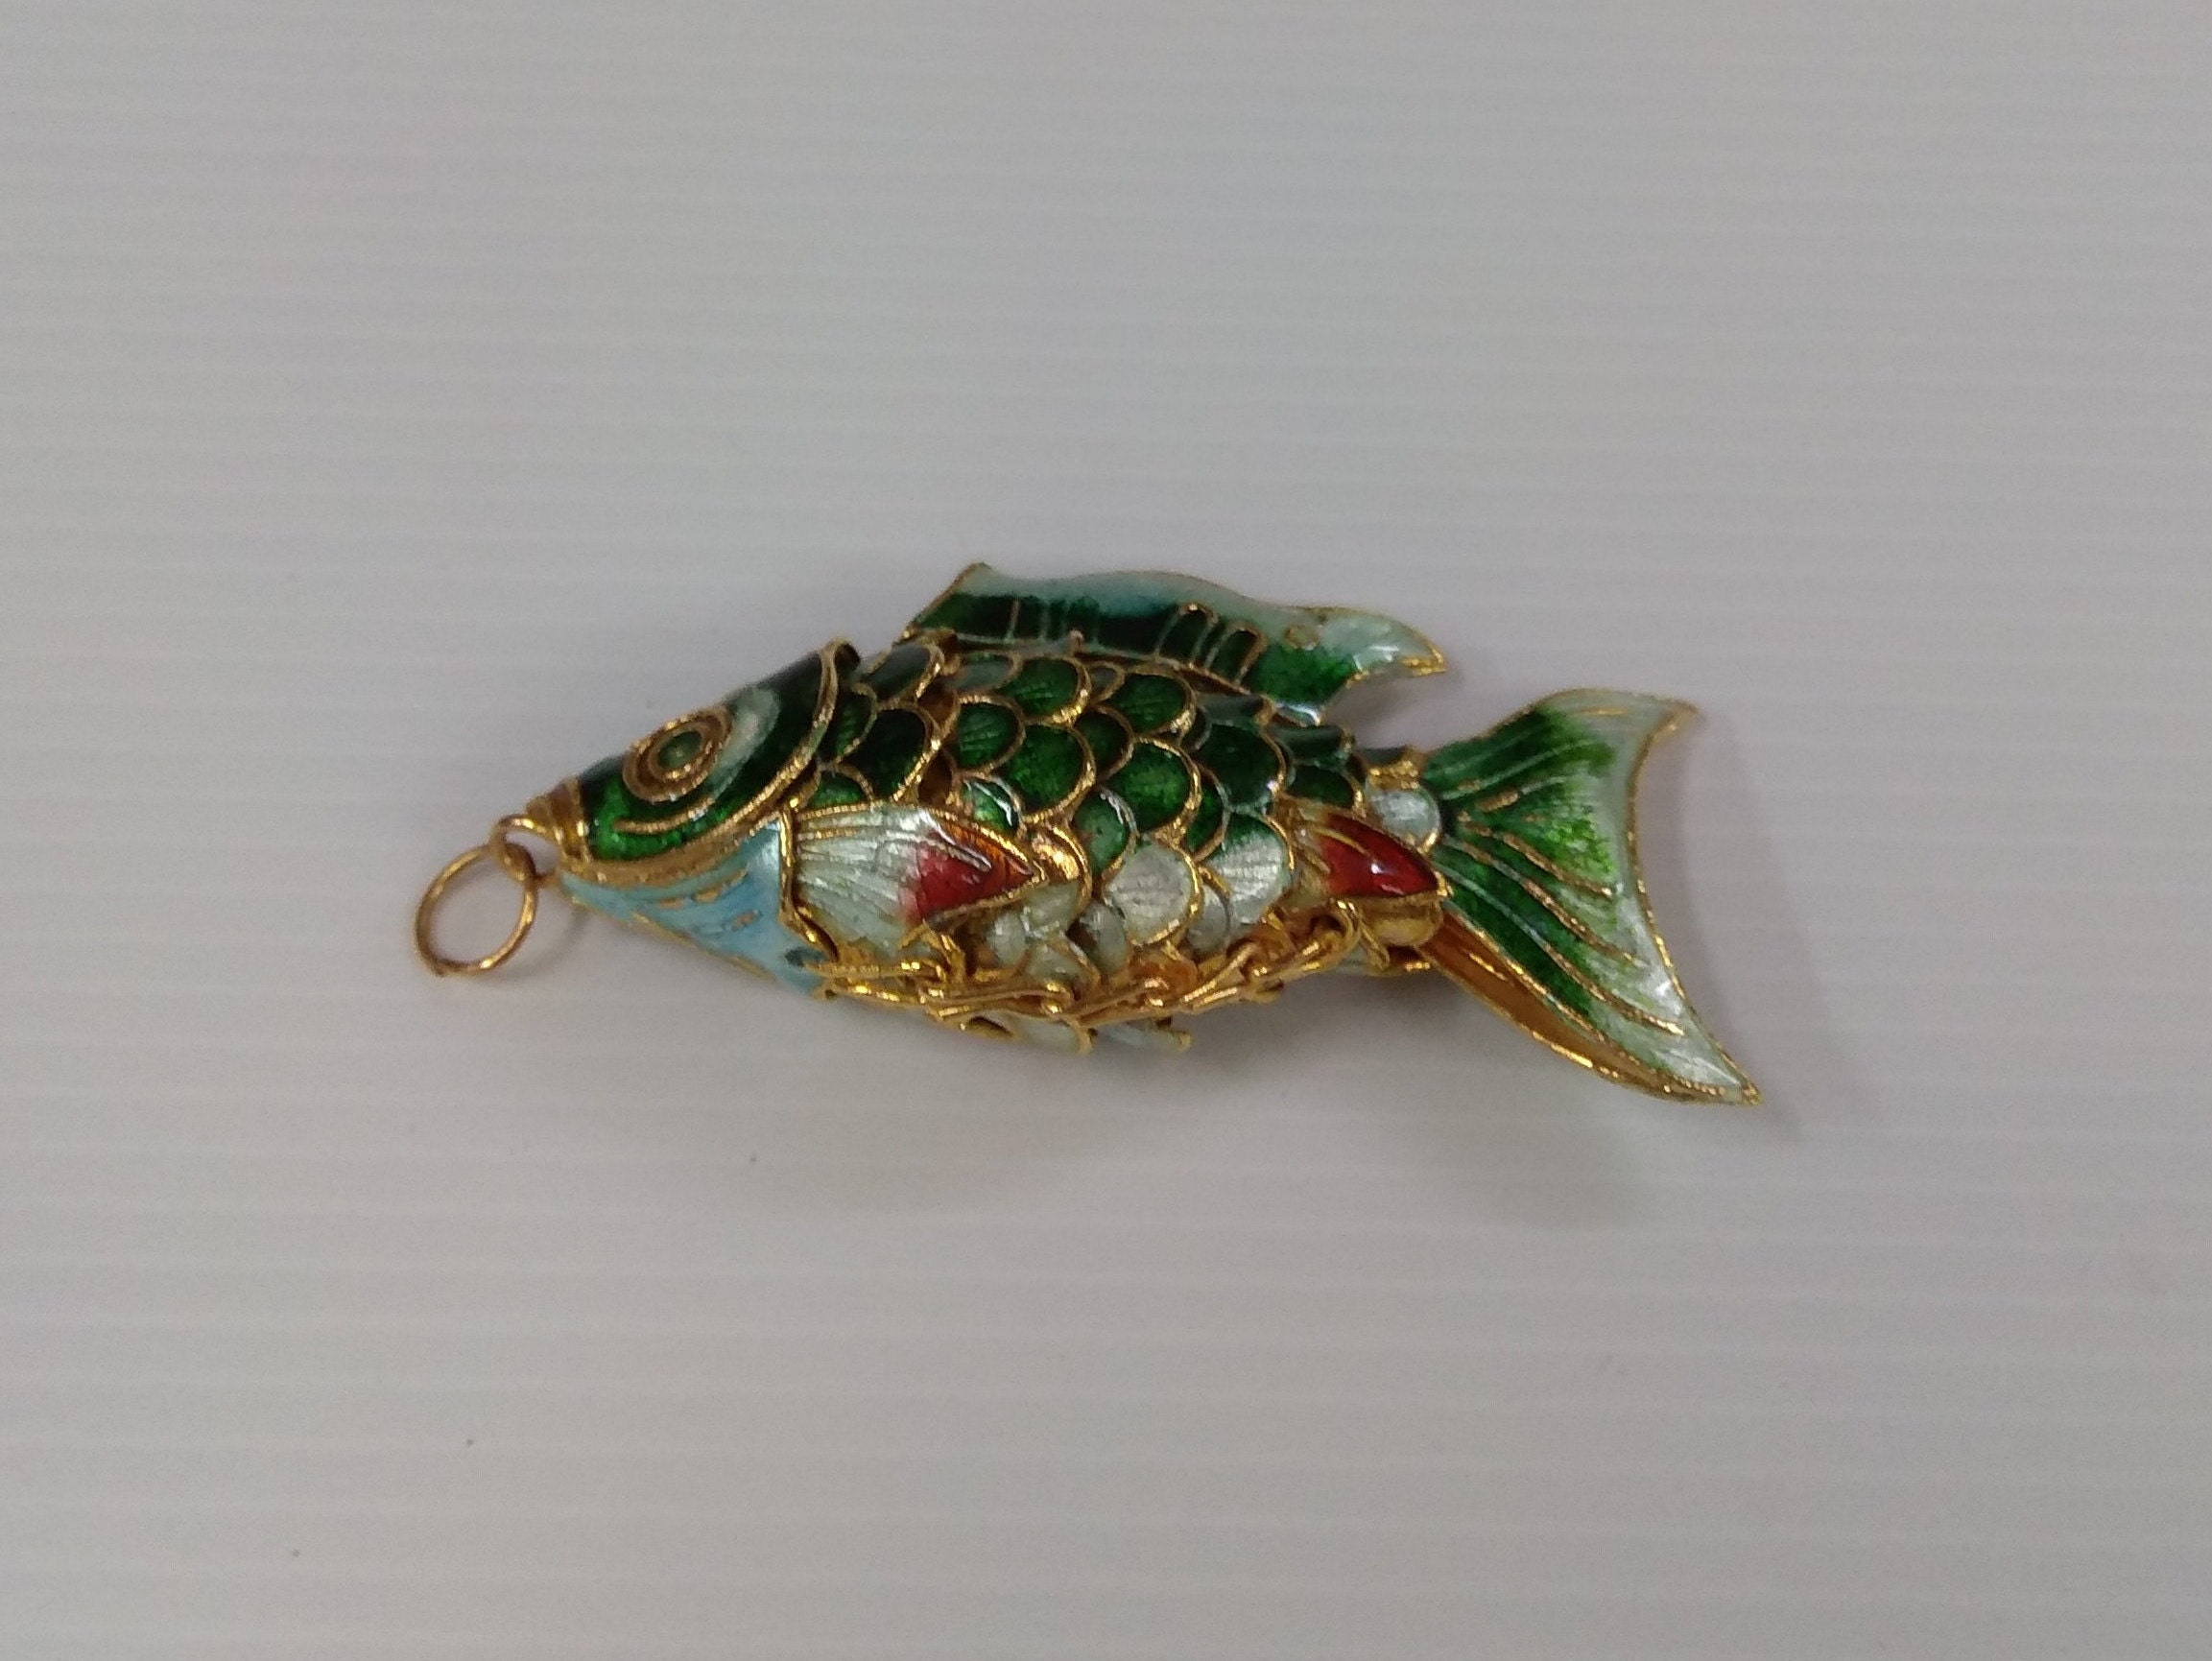 Chinese Handmade Cloisonne Enamel Colorful Dragon Wholesale Pendants  Ornaments Home Decor Christmas Tree Hanging Decoration Keychain Charm With  Box From Zuotang, $14.7